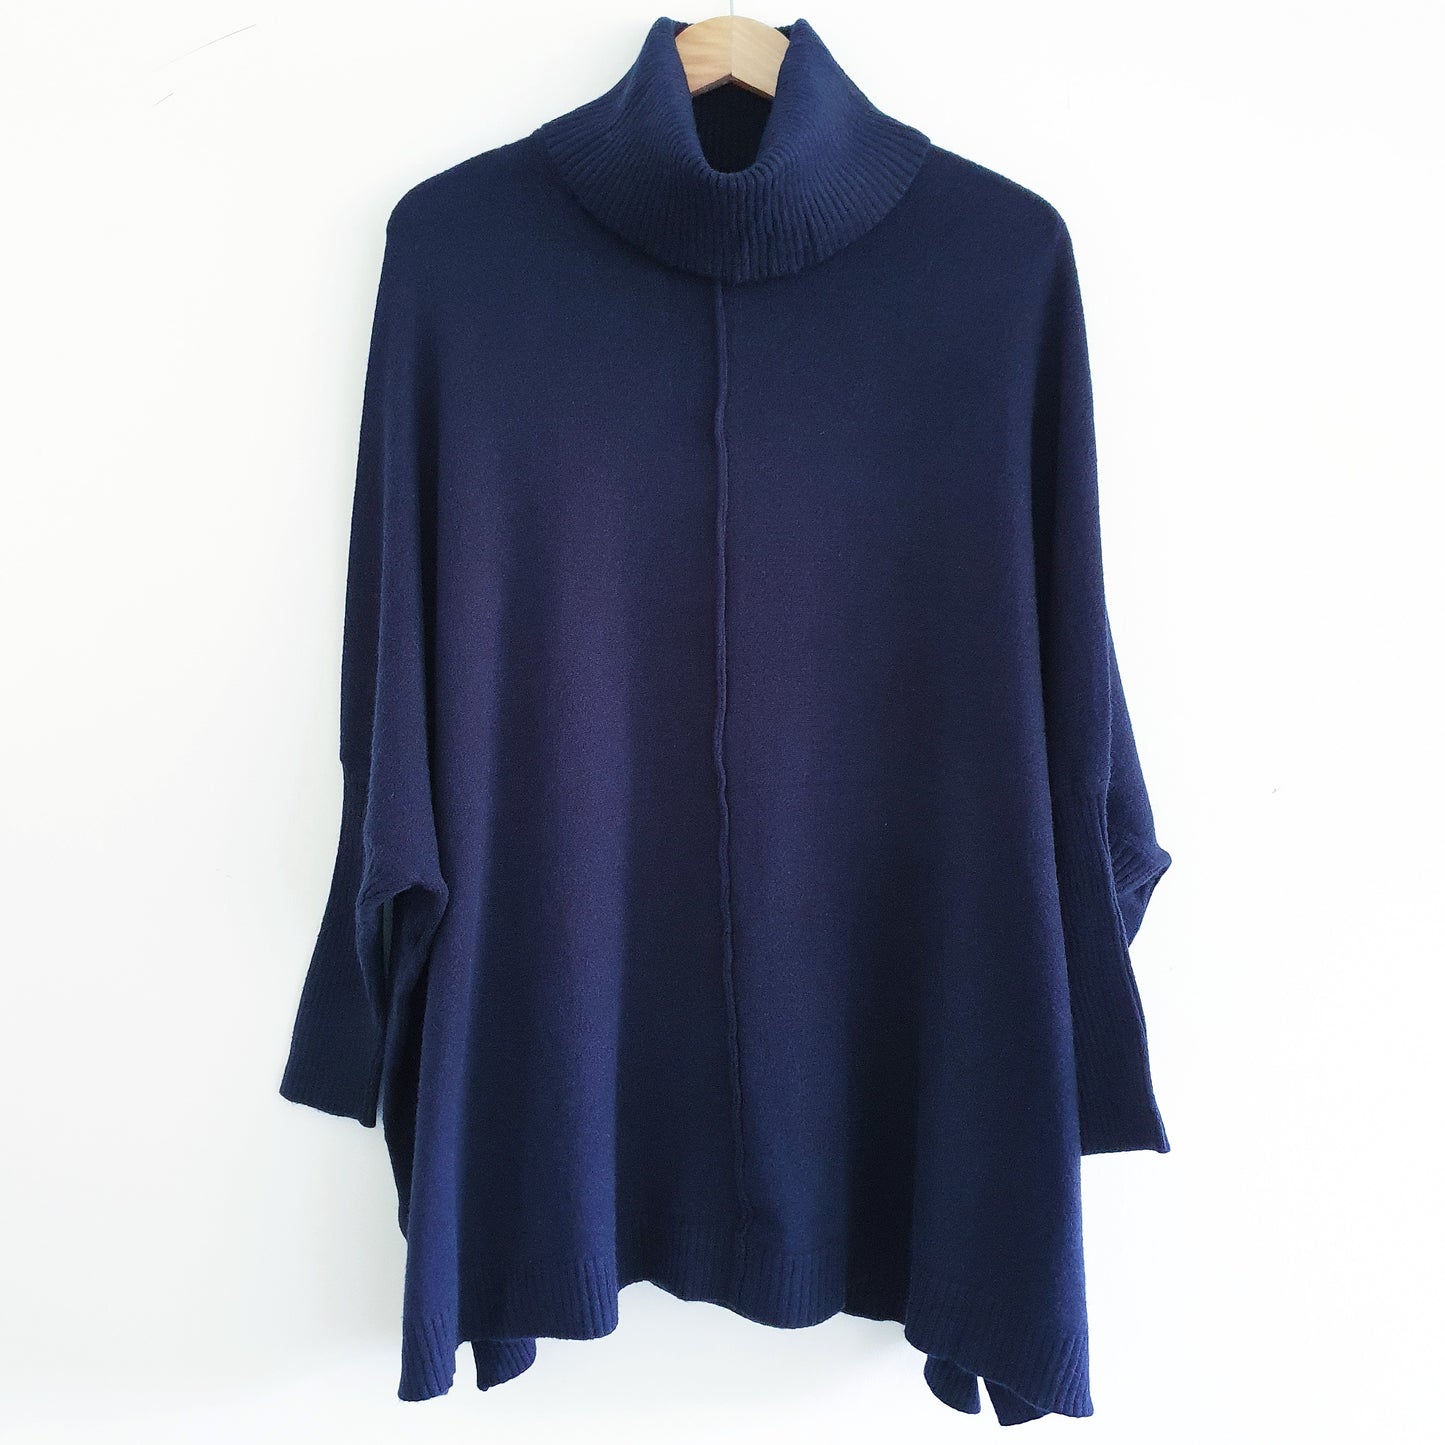 Rylie Roll Neck Jumper in Navy